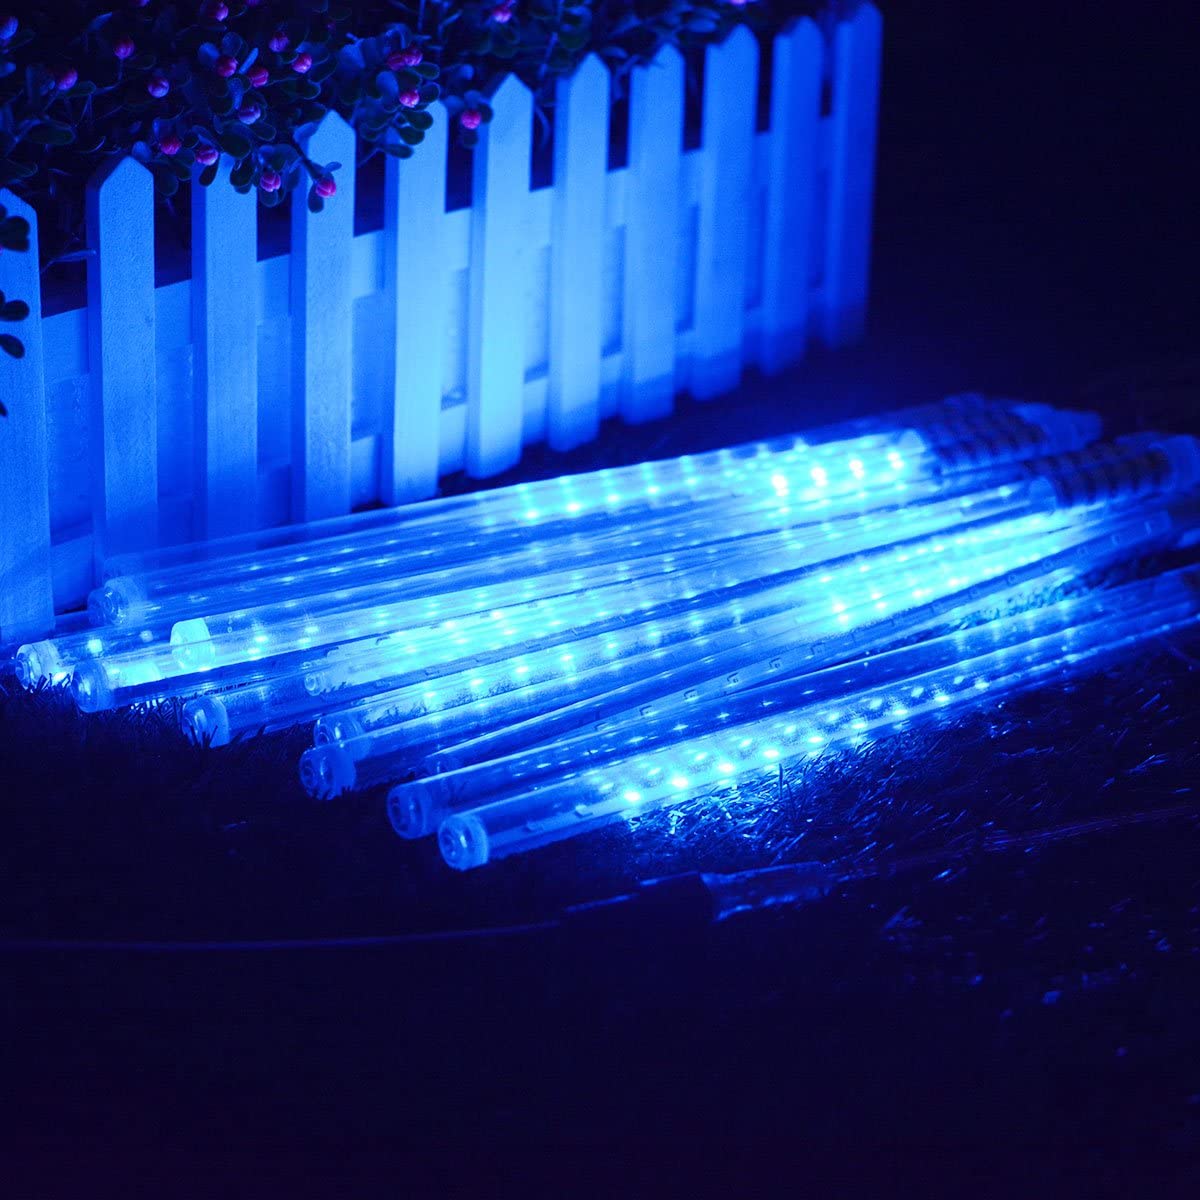 Vmanoo LED Outdoor, 8 Tube Meteor Shower Rain Lights Solar Powered Icicle Raindrop Snow Falling, Cascading Lighting for Garden Outdoor Patio Holiday Party Halloween Decoration (Blue) A1 Blue - image 4 of 8